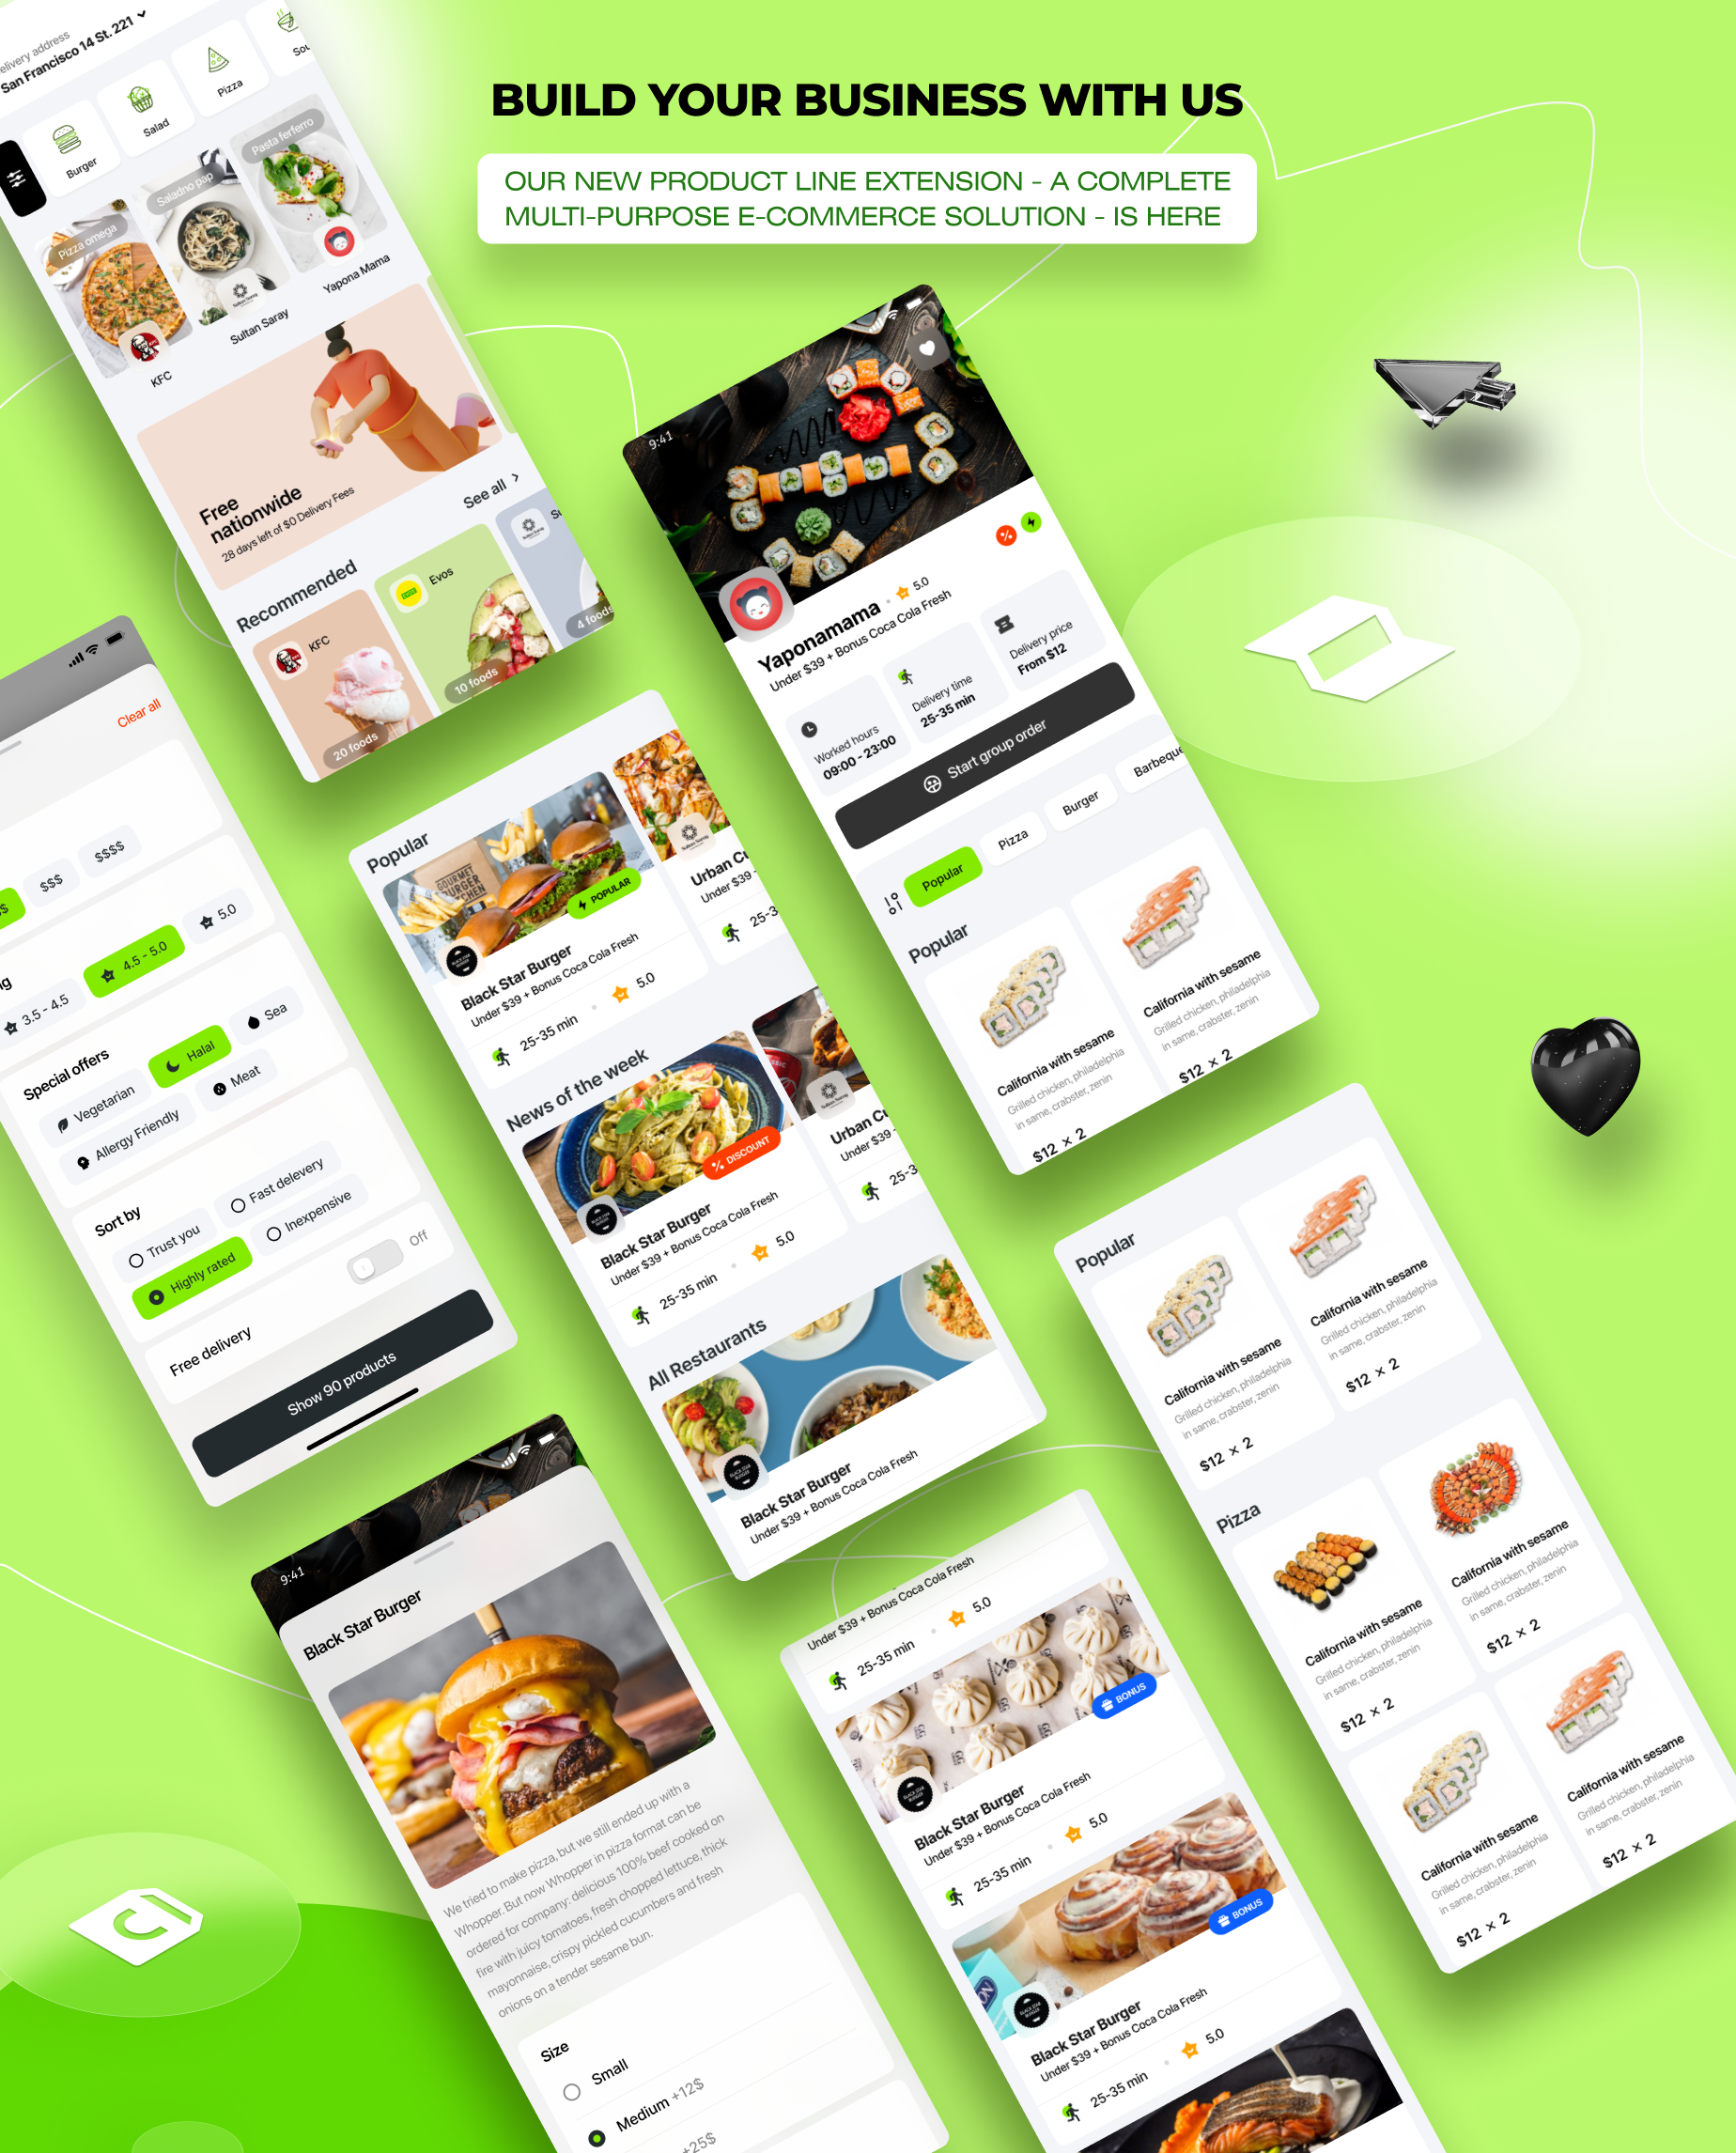 Foodyman - Multi-Restaurant Food and Grocery Ordering and Delivery Marketplace (Web & Customer Apps) - 12